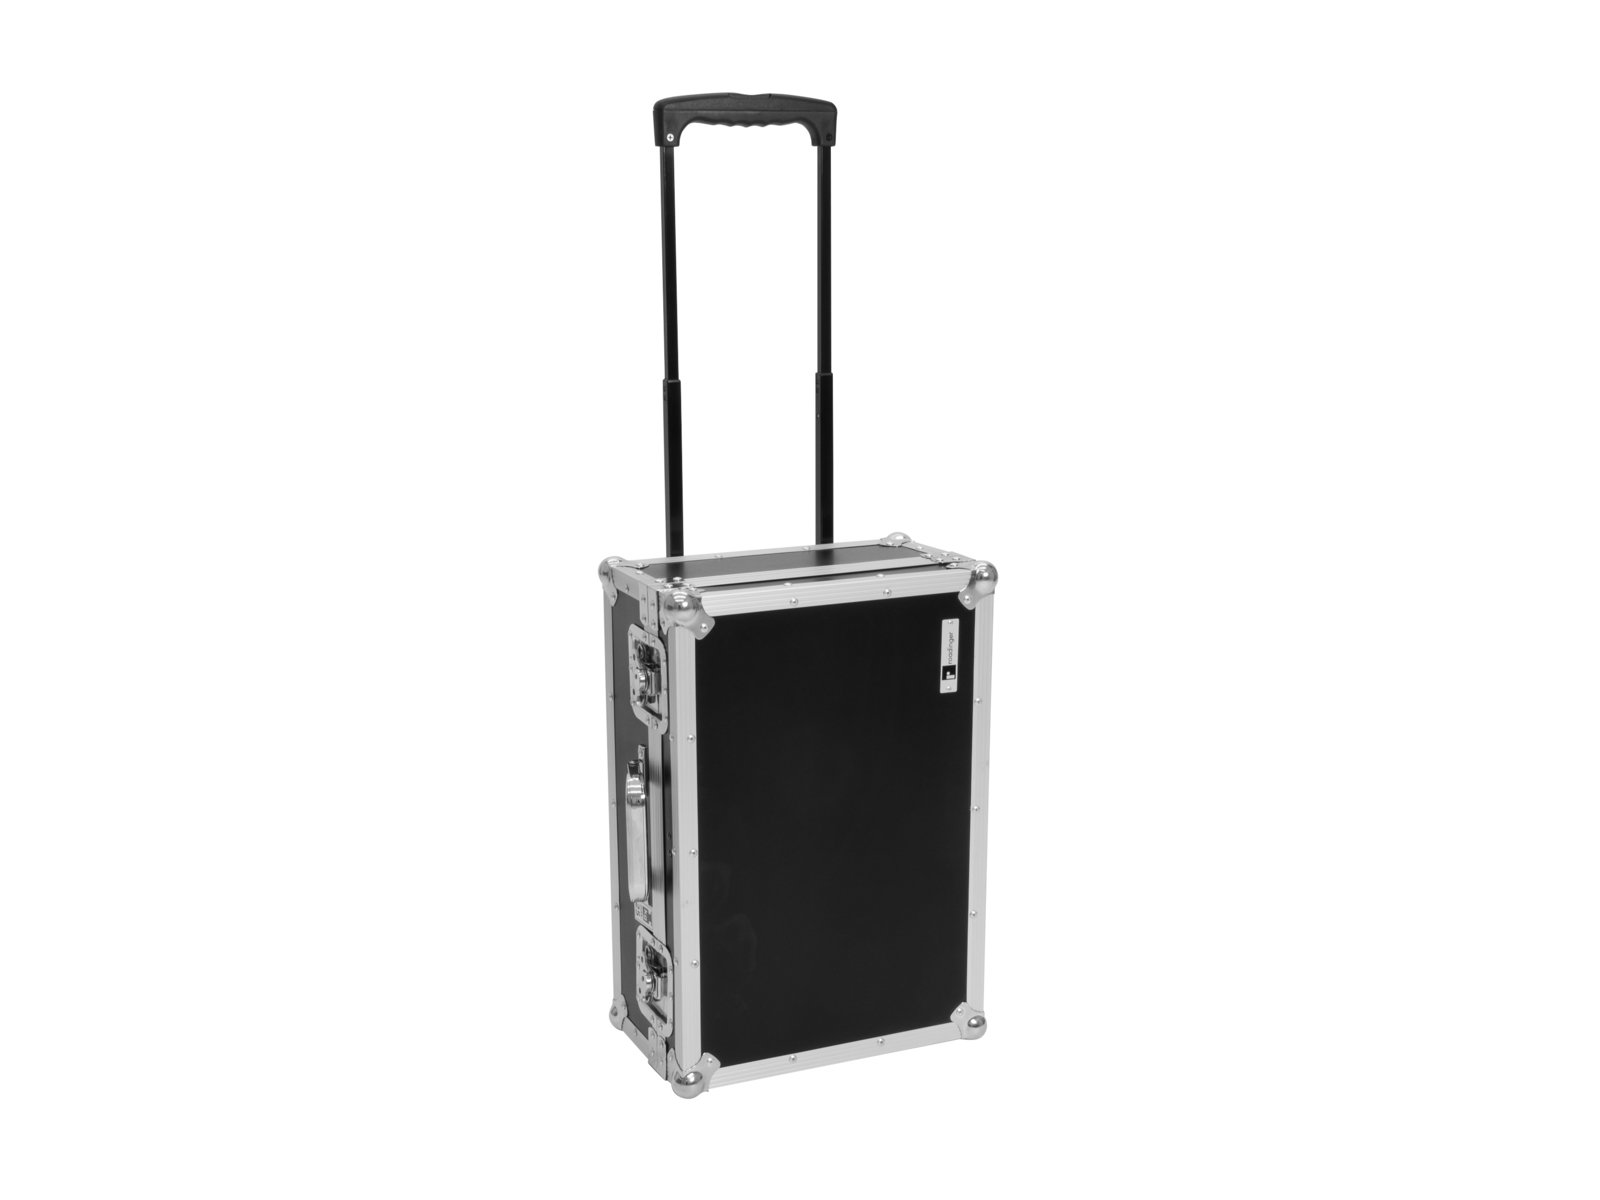 ROADINGER Universal Case SOD-1 with Trolley